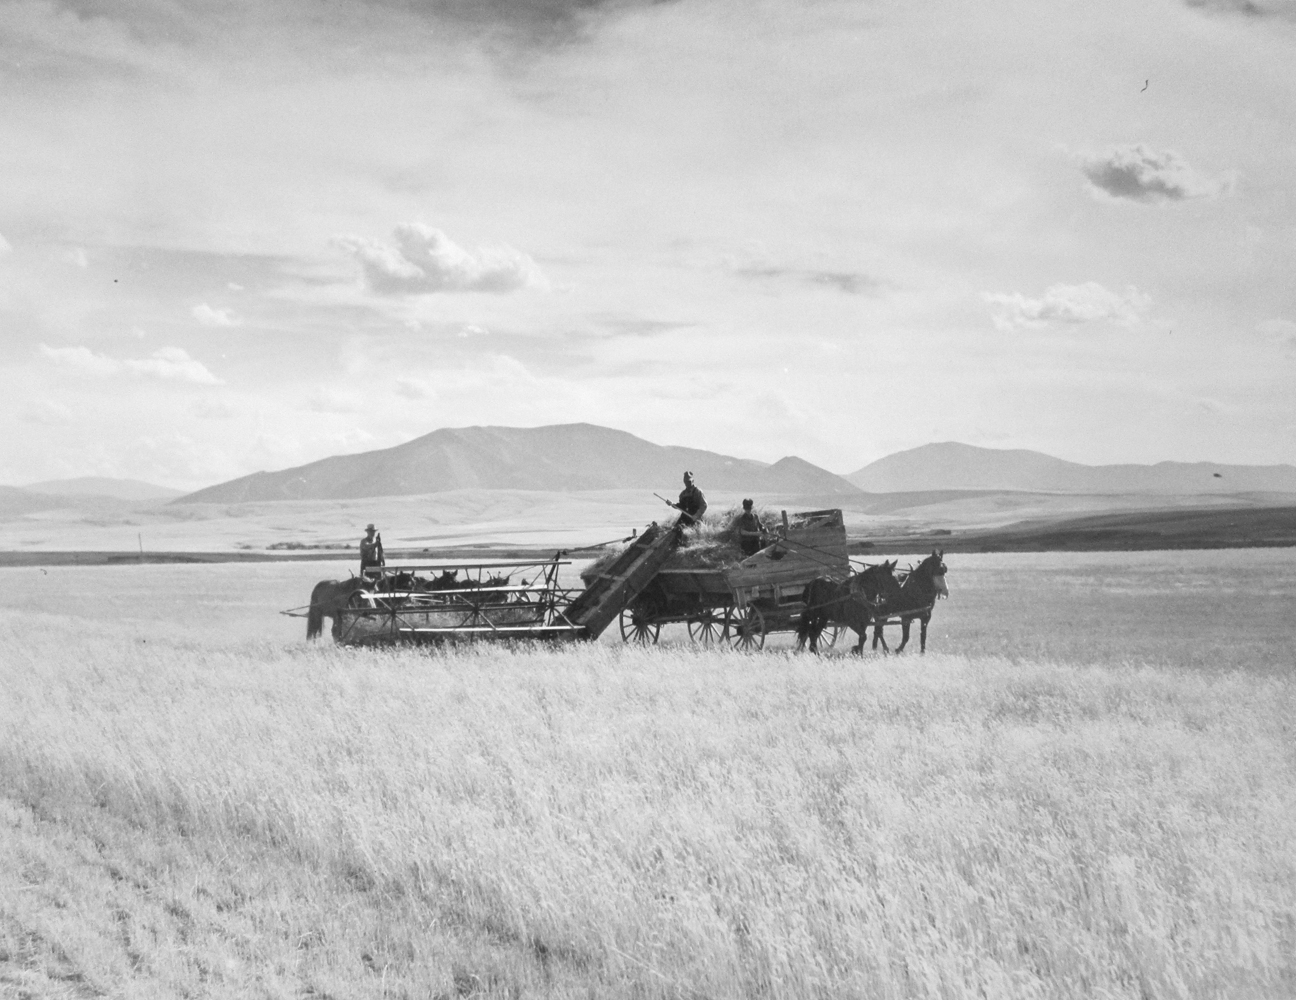 Marion Post Wolcott, Cutting crested wheat grass, old binder-four horse team. Judith Basin, Montana, 1941, gelatin silver print, signed, 11 x 14 inches